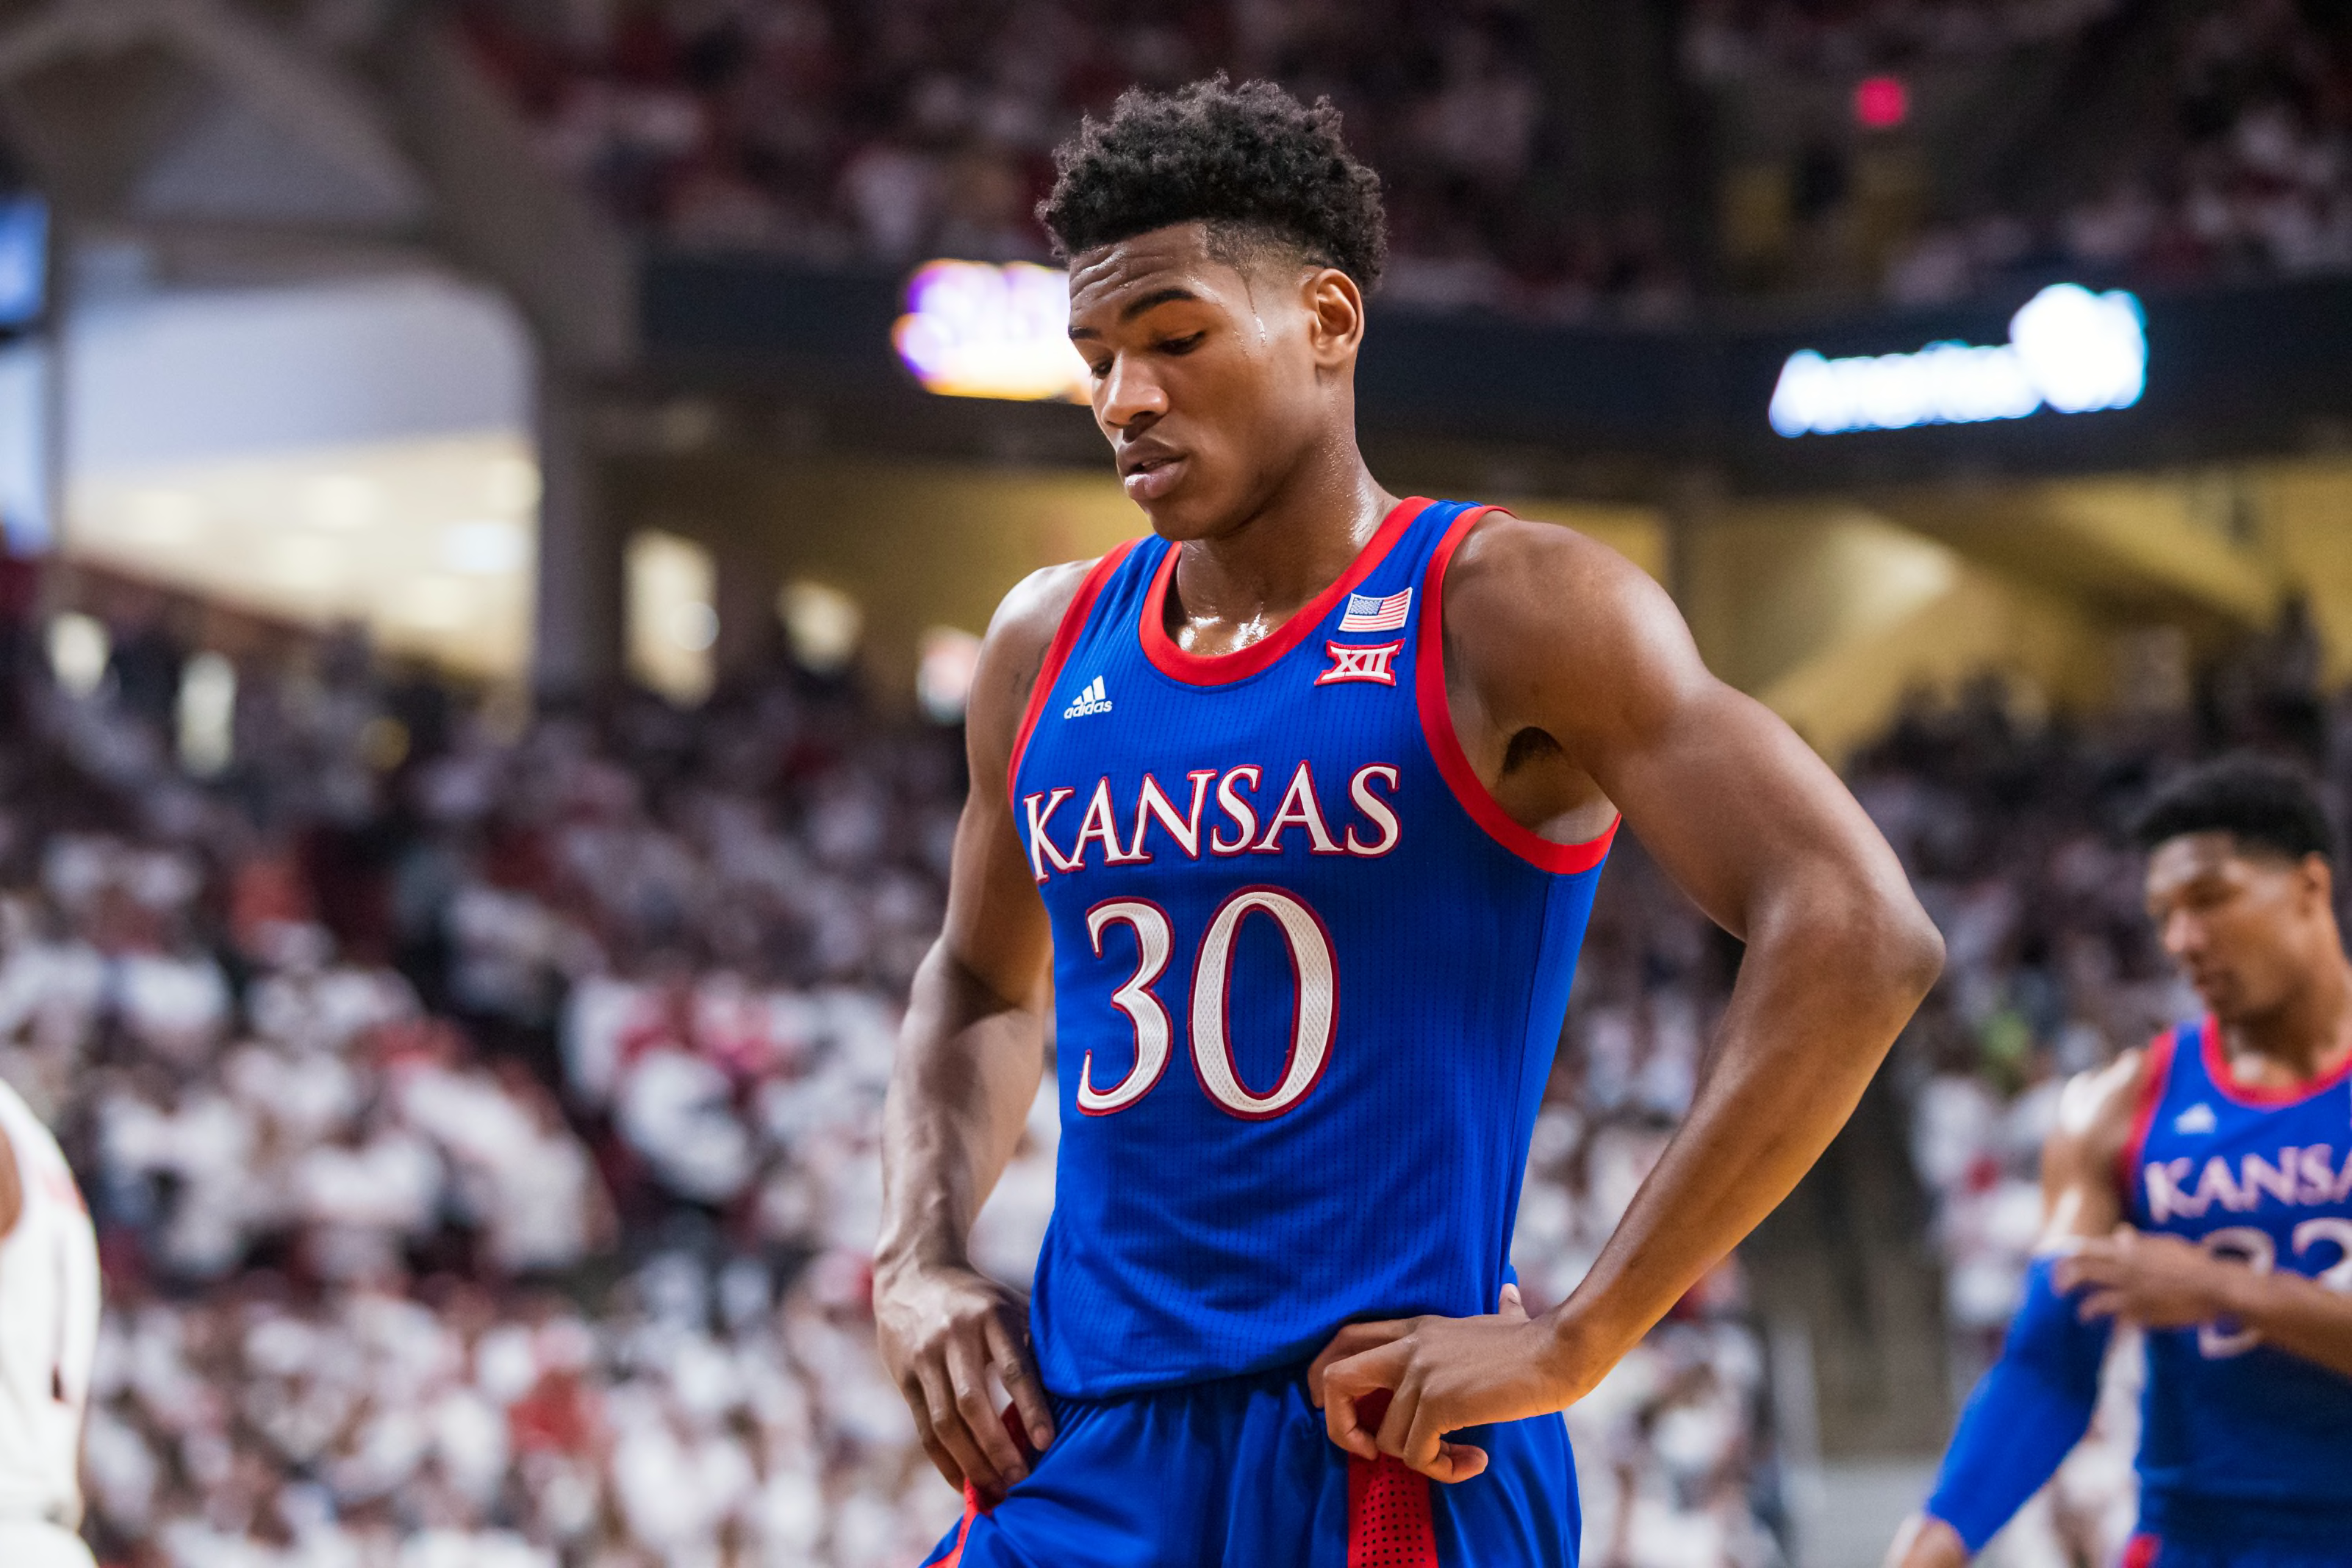 Kansas Basketball: 2020-21 season preview for the Jayhawks - Page 2